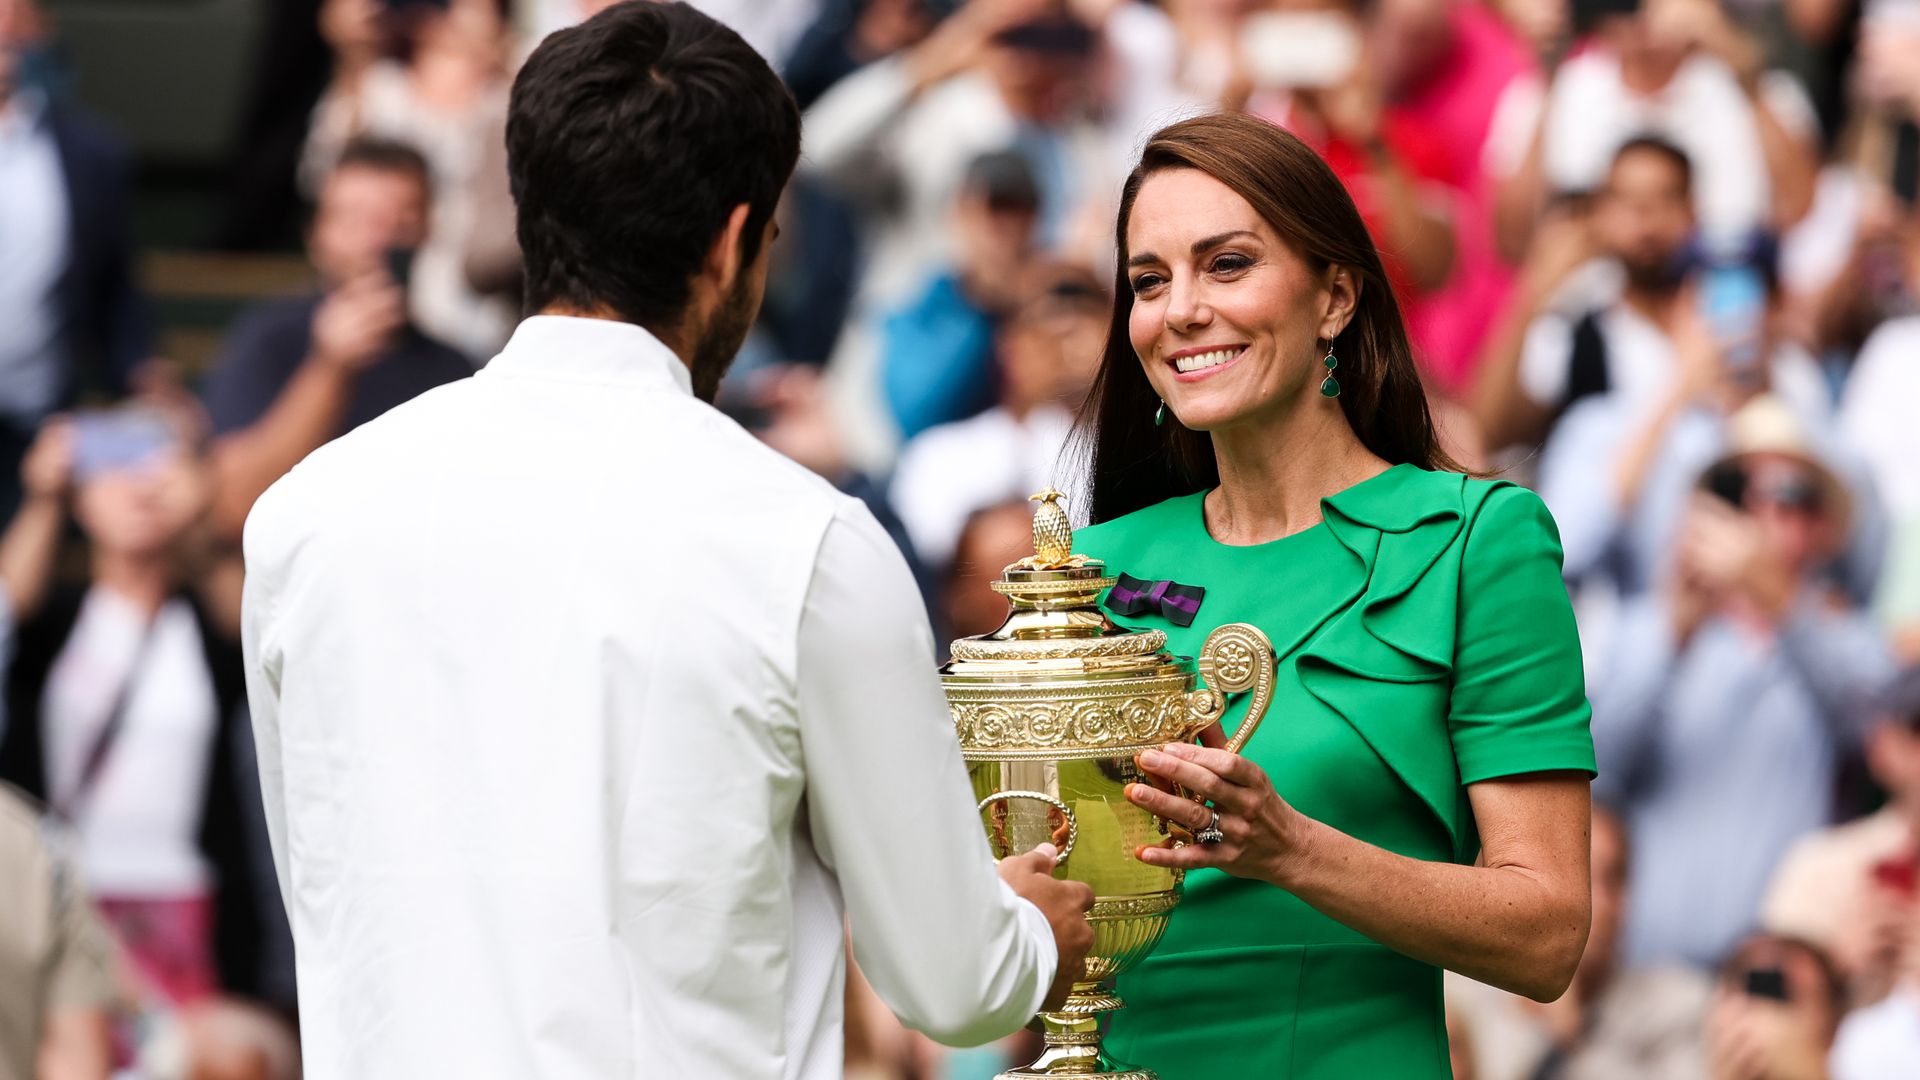 Kate Middleton gives the trophy to Carlos Alcaraz - Wimbledon 2023